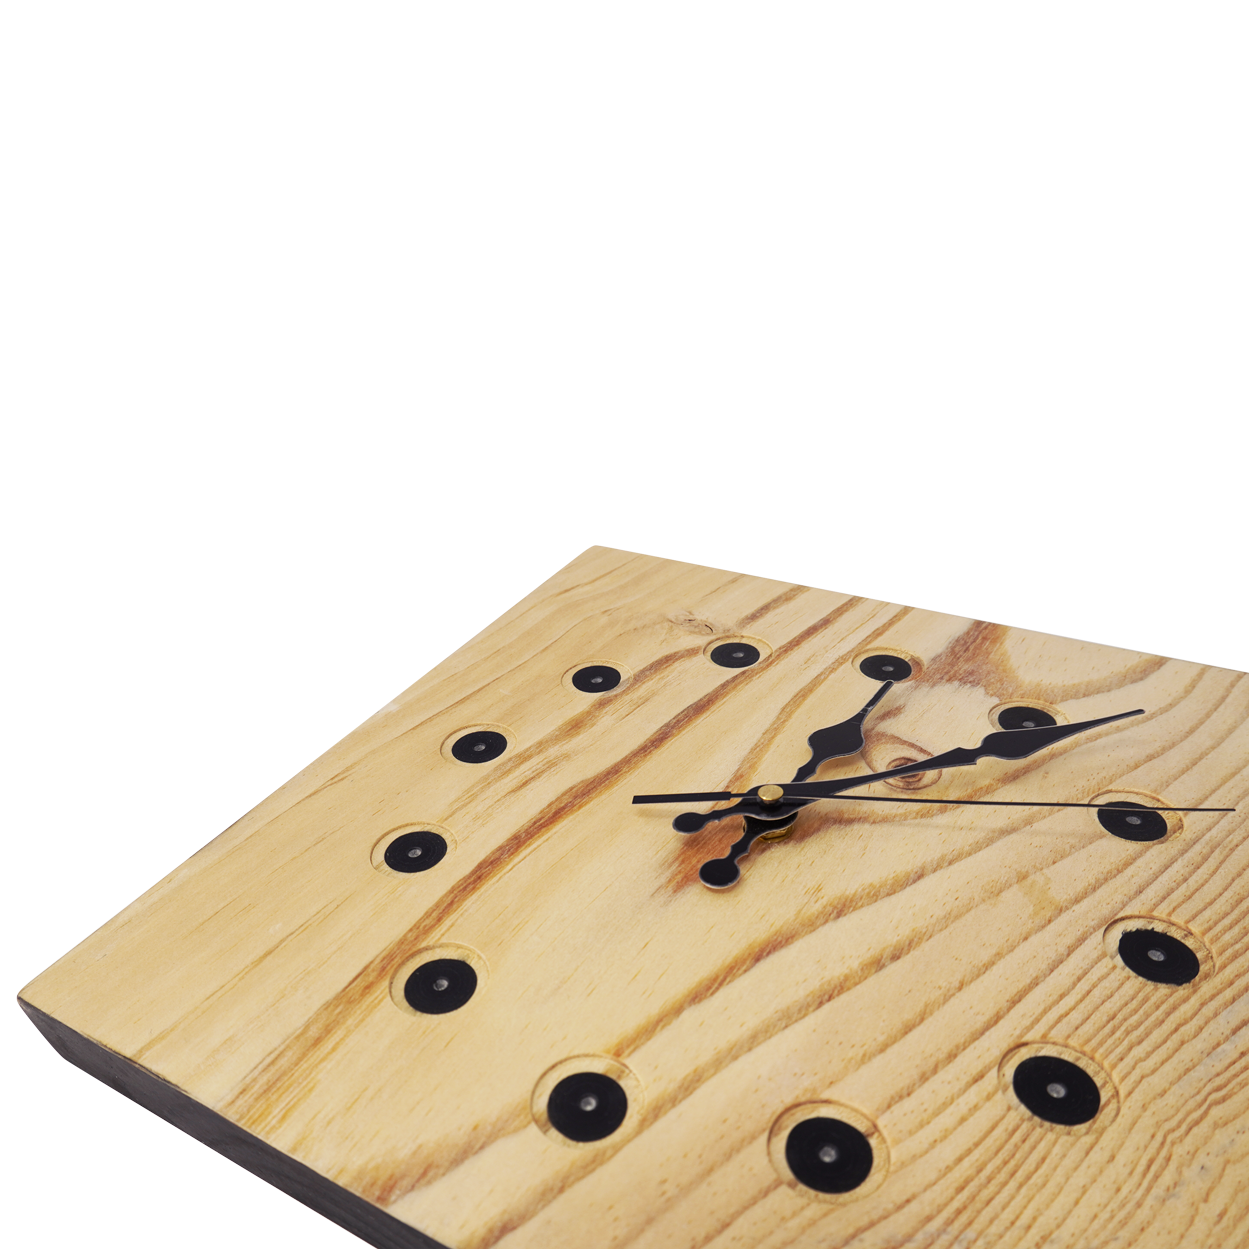 pine wall clock for sale - San Diego -reclaimed wood